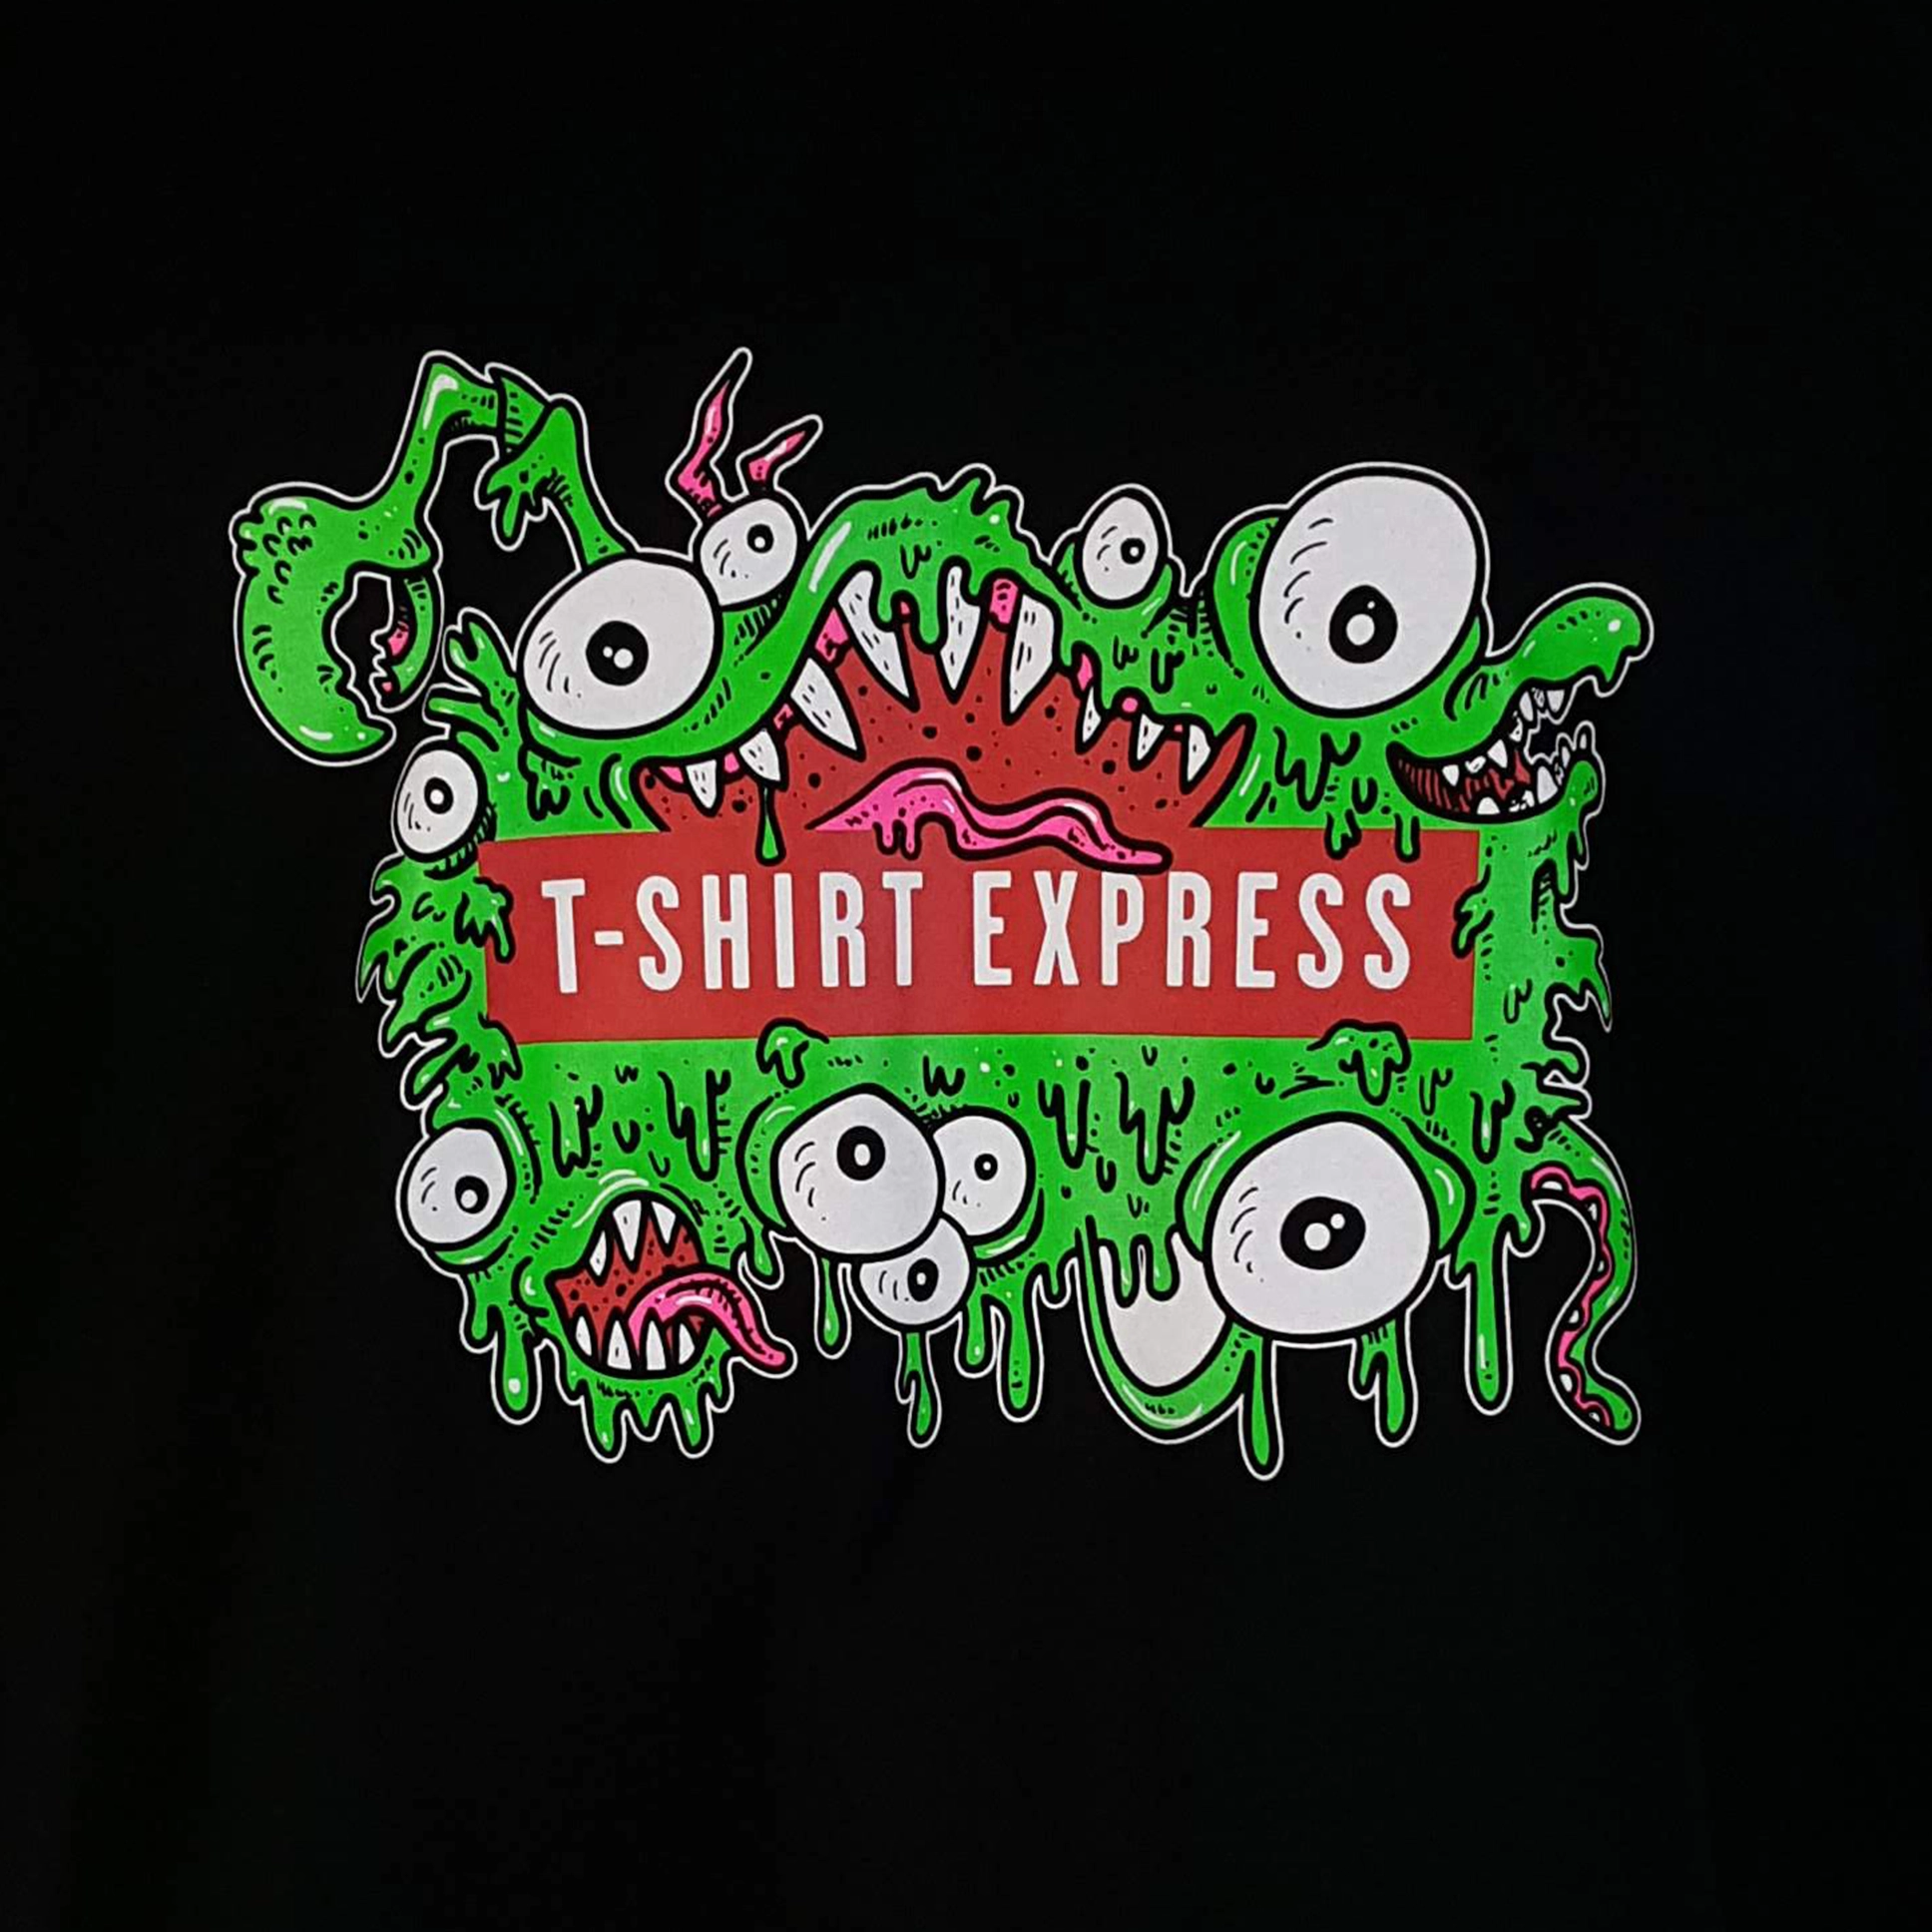 t-shirt express in Chatham ohio